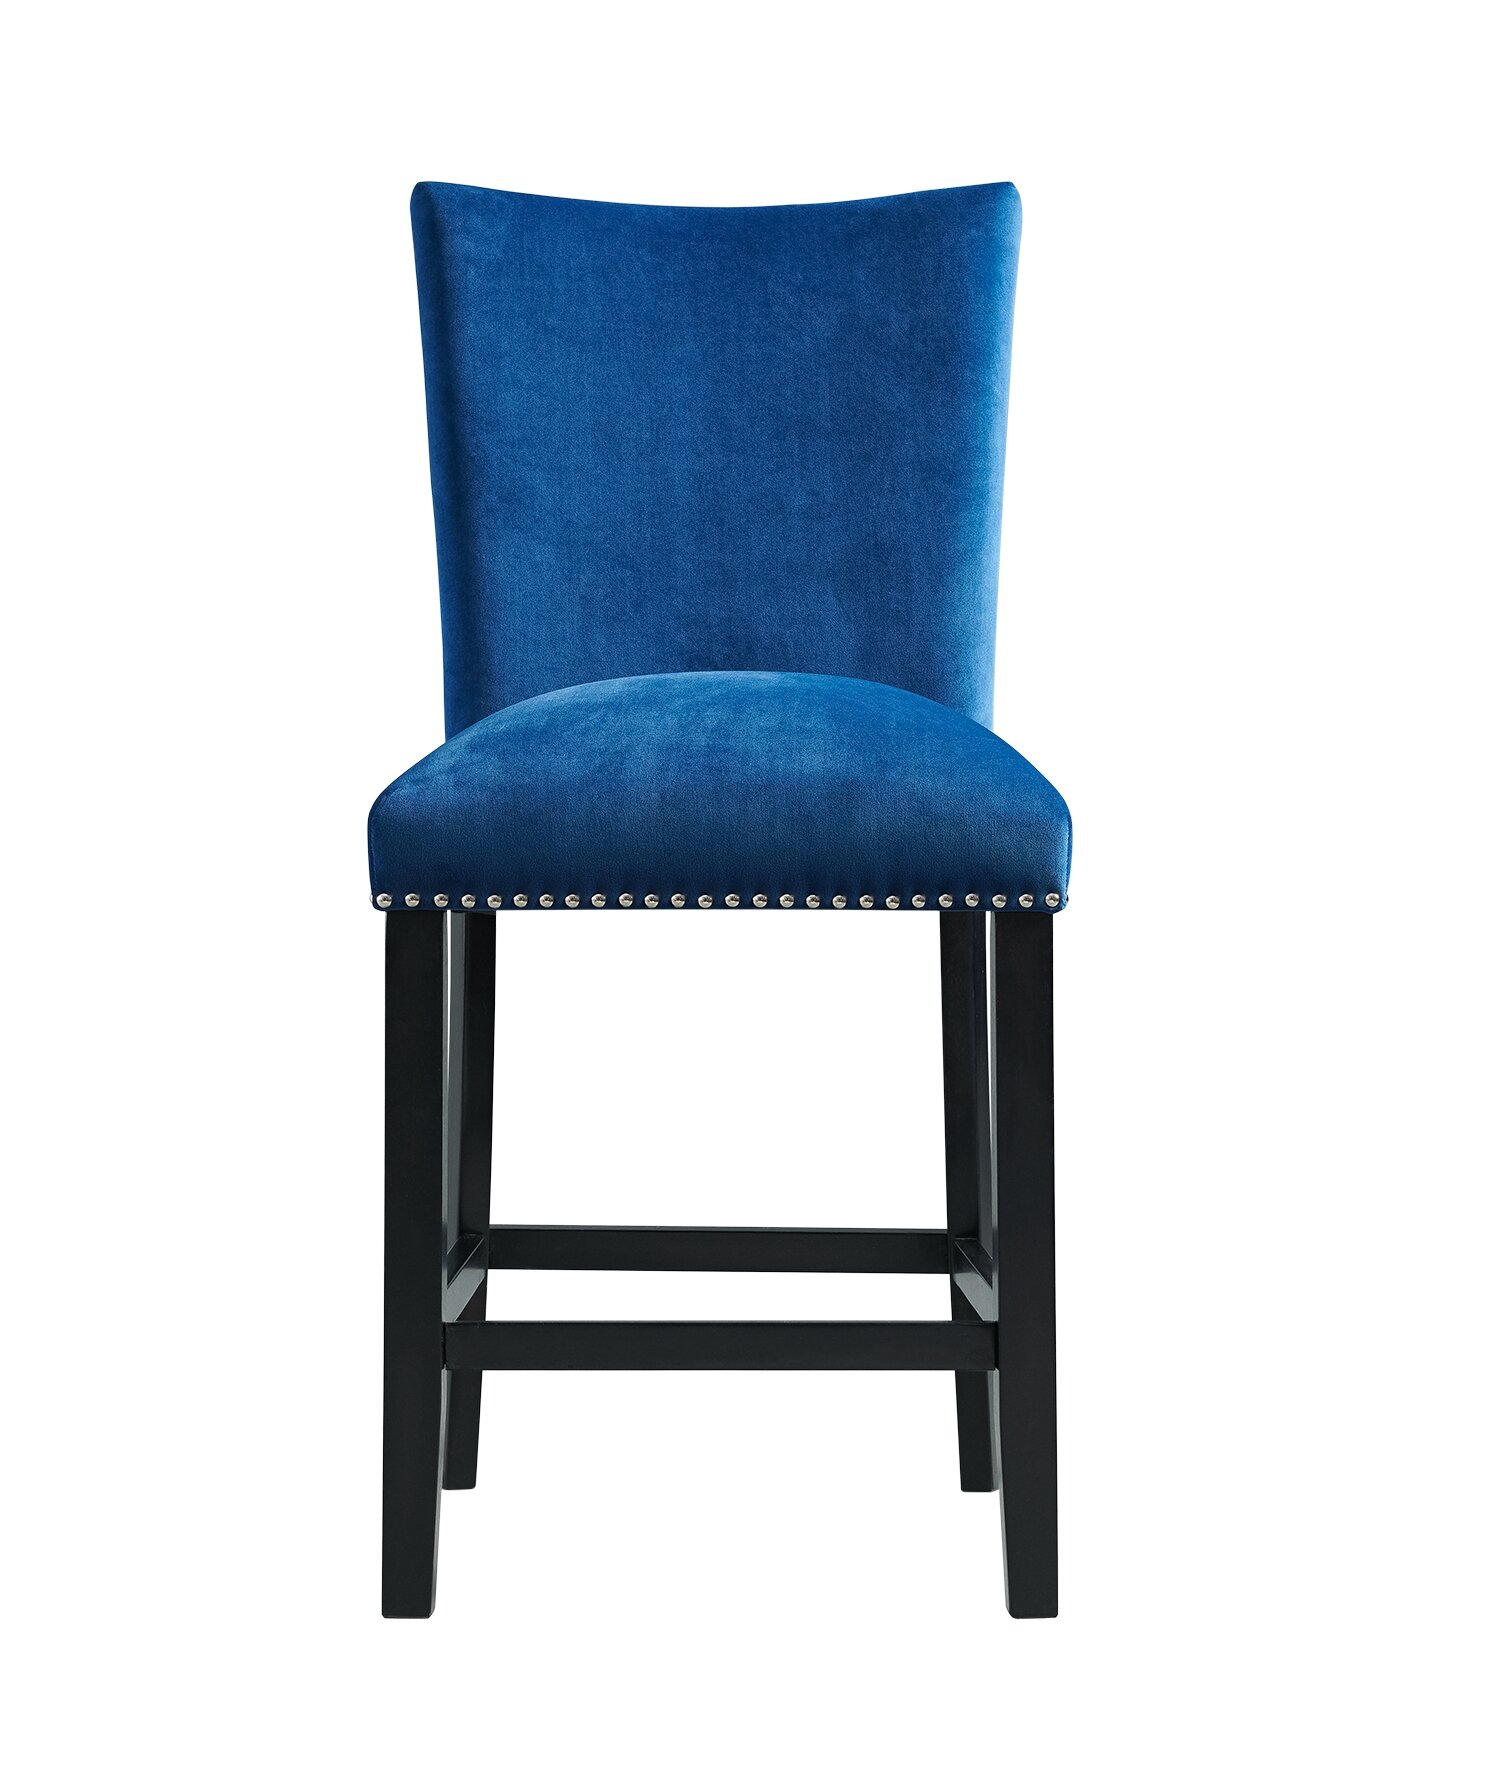 Featured image of post Blue Tufted Bar Stools / Threshold brookline tufted barstool at target.